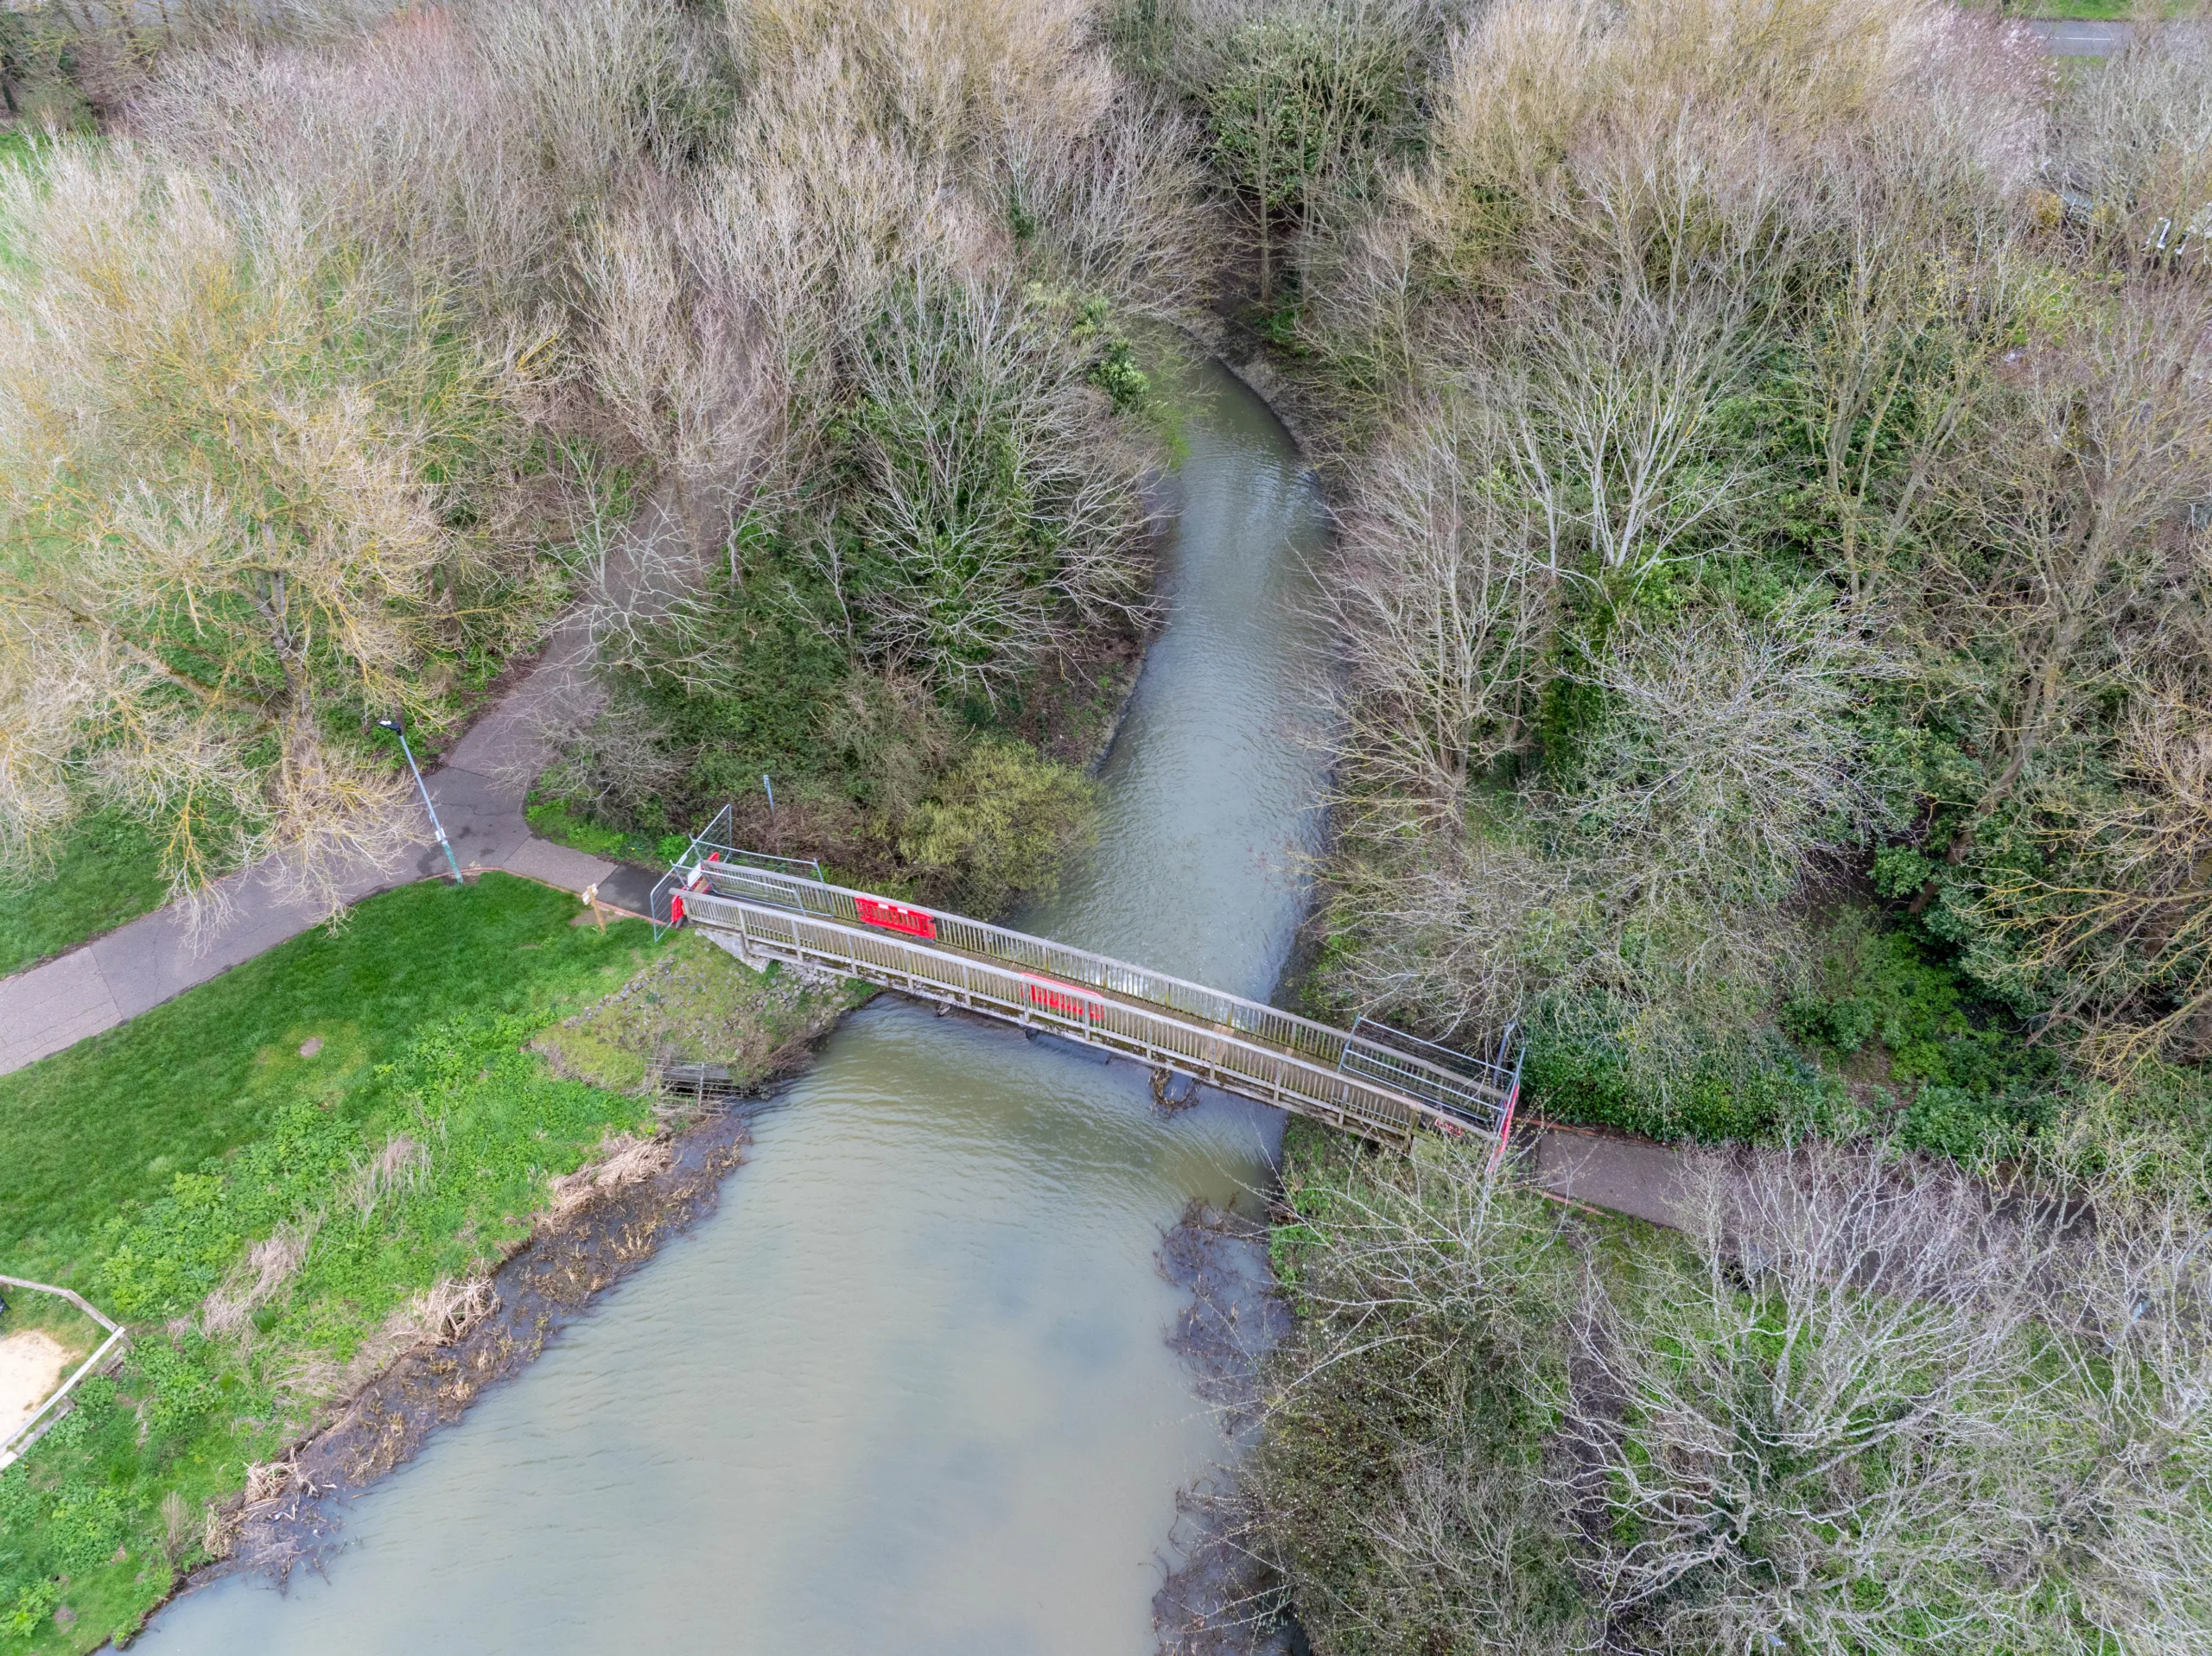 MP Paul Bristow has called for bridges at Cuckoos Hollow, Peterborough, to re-open despite warnings for public safety over their poor condition. PHOTO: Terry Harris